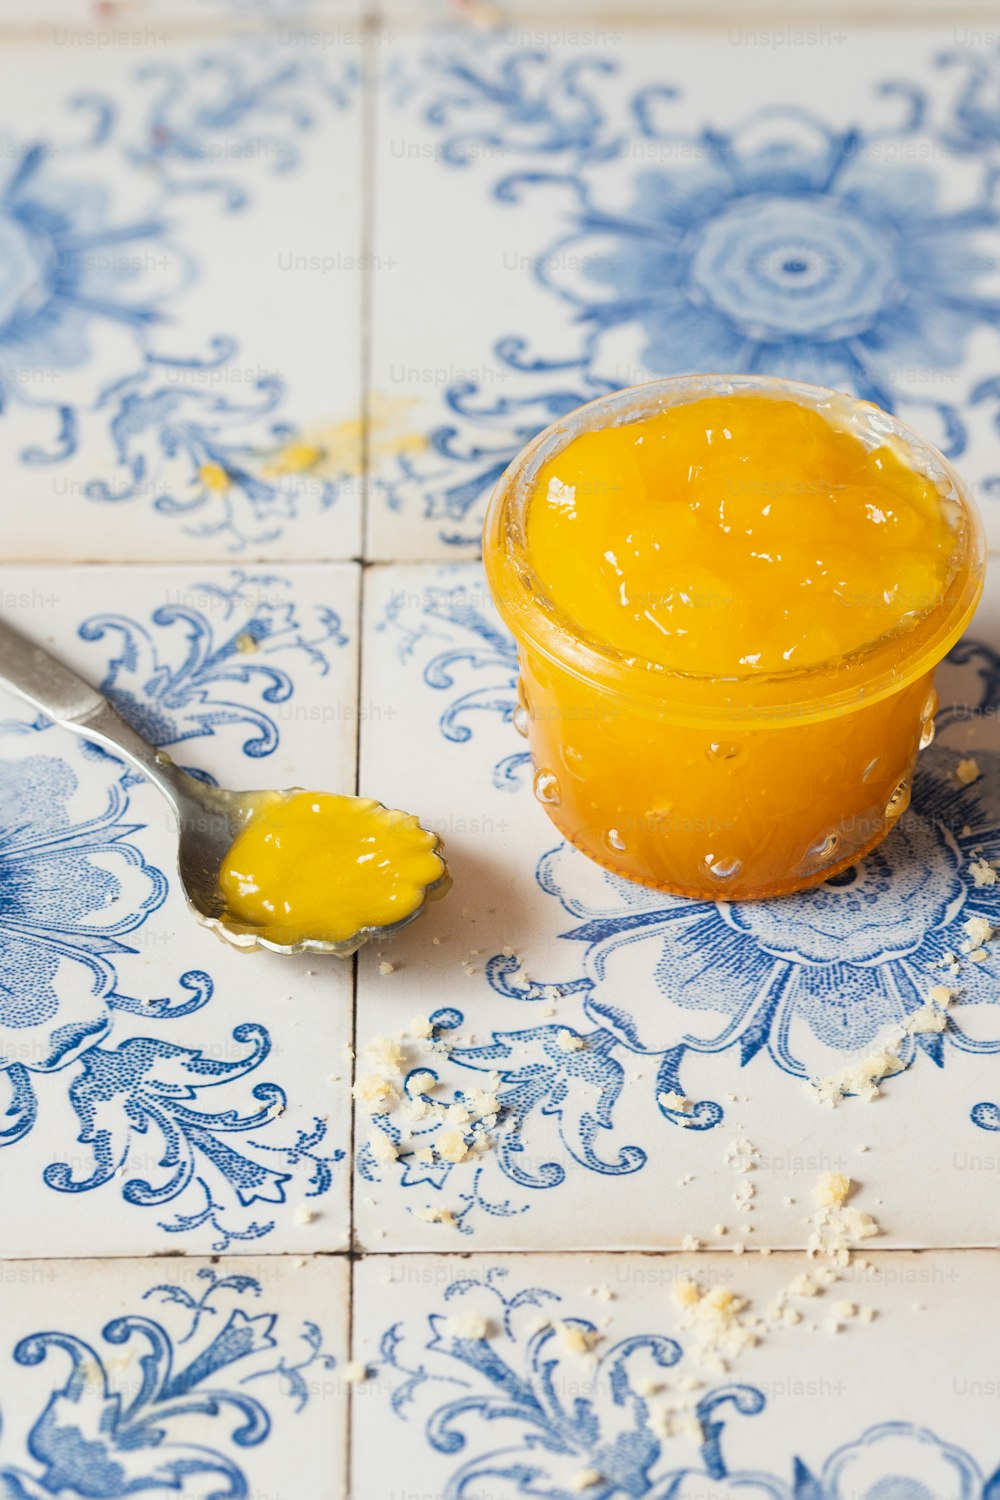 a spoon with a jar of orange marmalade on a blue and white tile